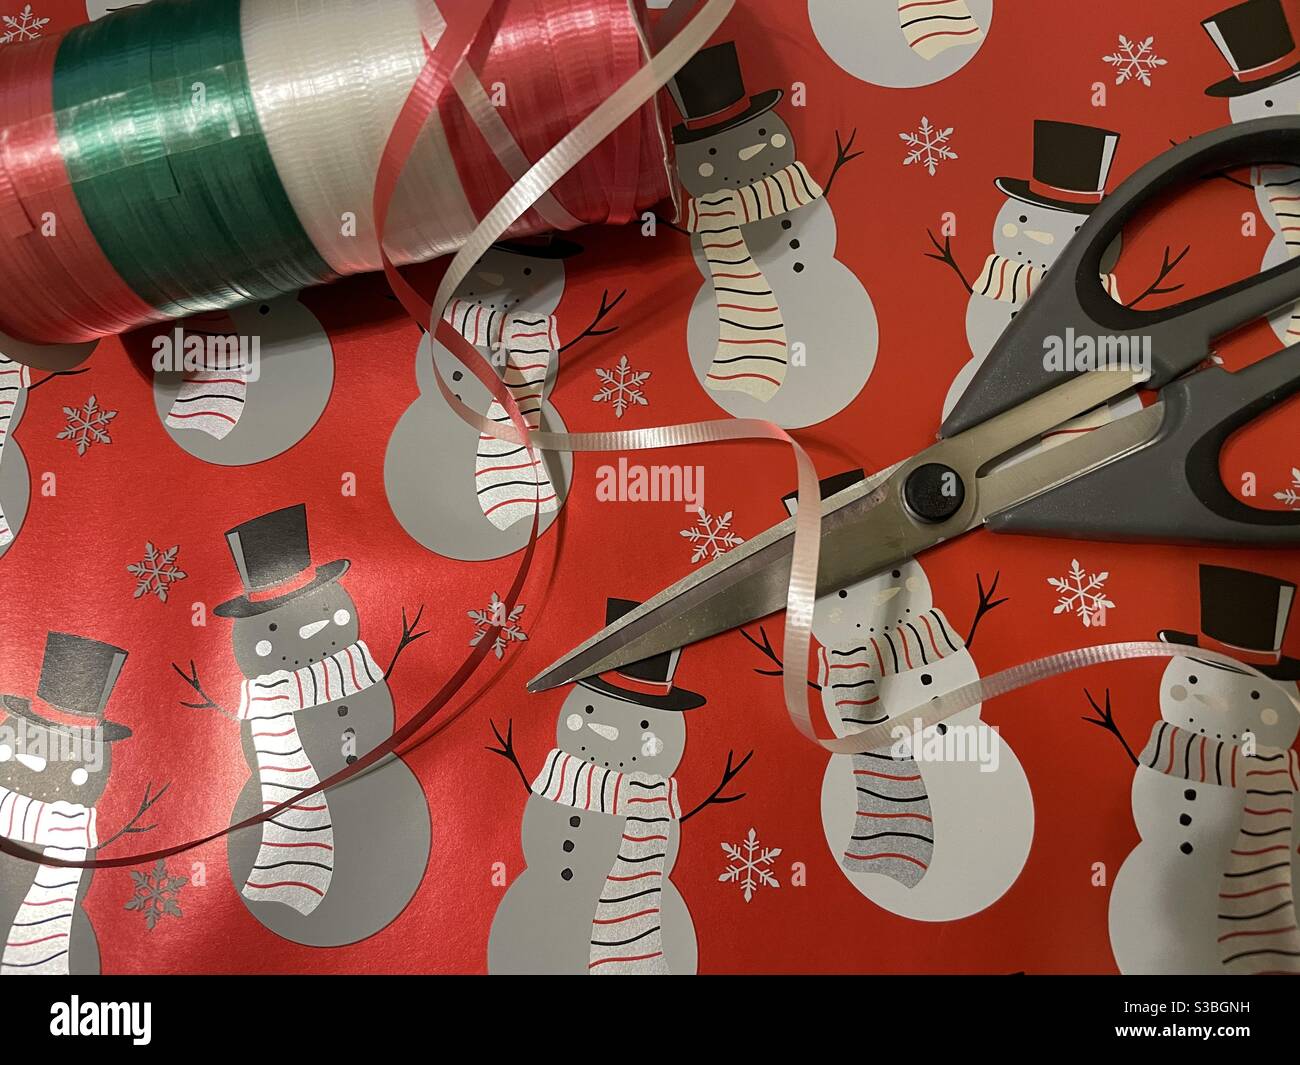 Christmas 2020 wrapping paper, scissors and Sellotape tape reel Stock Photo  - Alamy